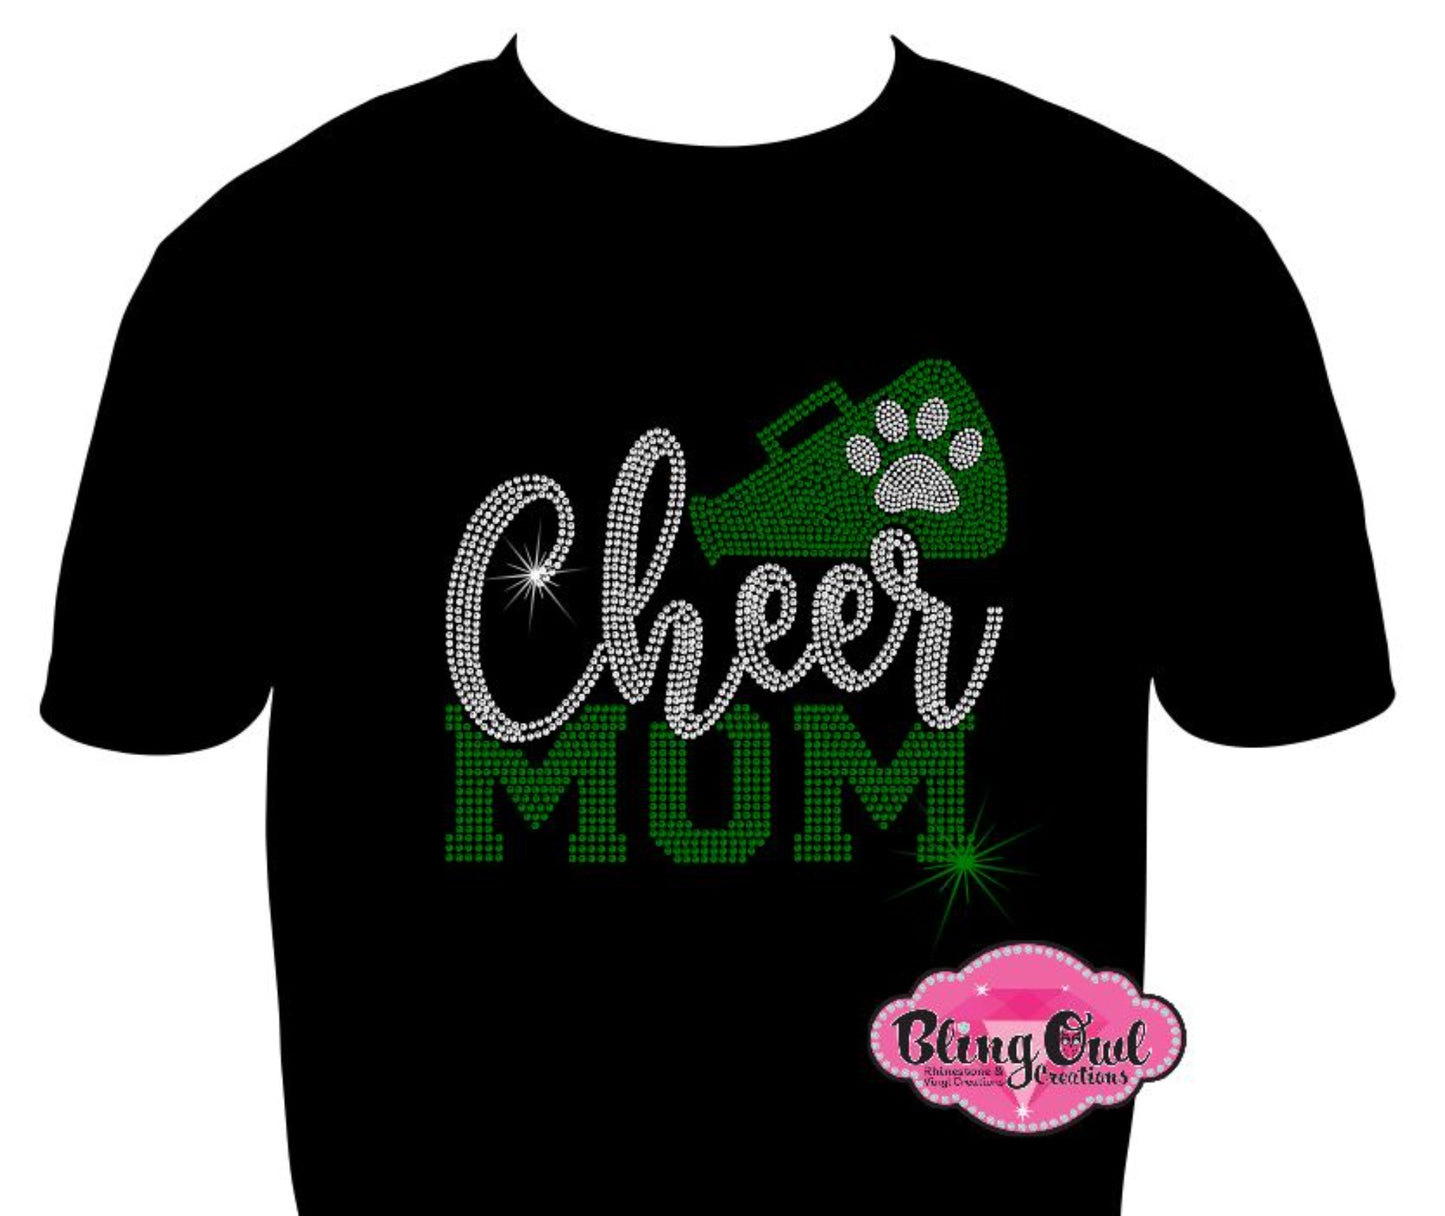 cheer_mom_megaphone design glam_shirt rhinestones sparkle bling _perfect_cute_trendy_cheer_mom_tees gameday_outfit school_spirit_wear for moms